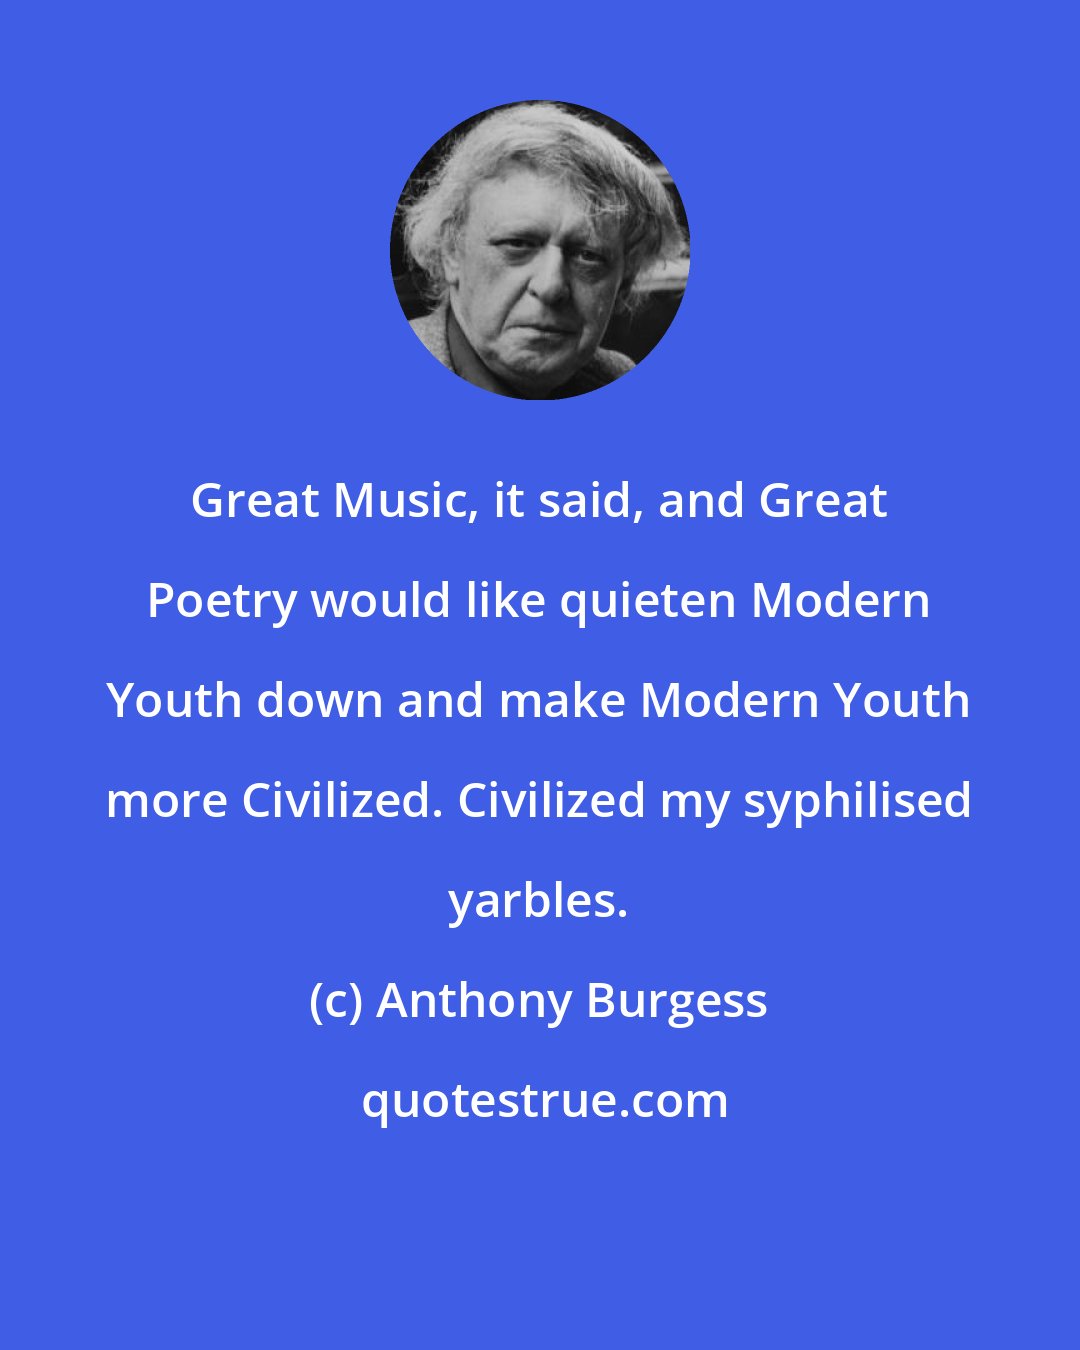 Anthony Burgess: Great Music, it said, and Great Poetry would like quieten Modern Youth down and make Modern Youth more Civilized. Civilized my syphilised yarbles.